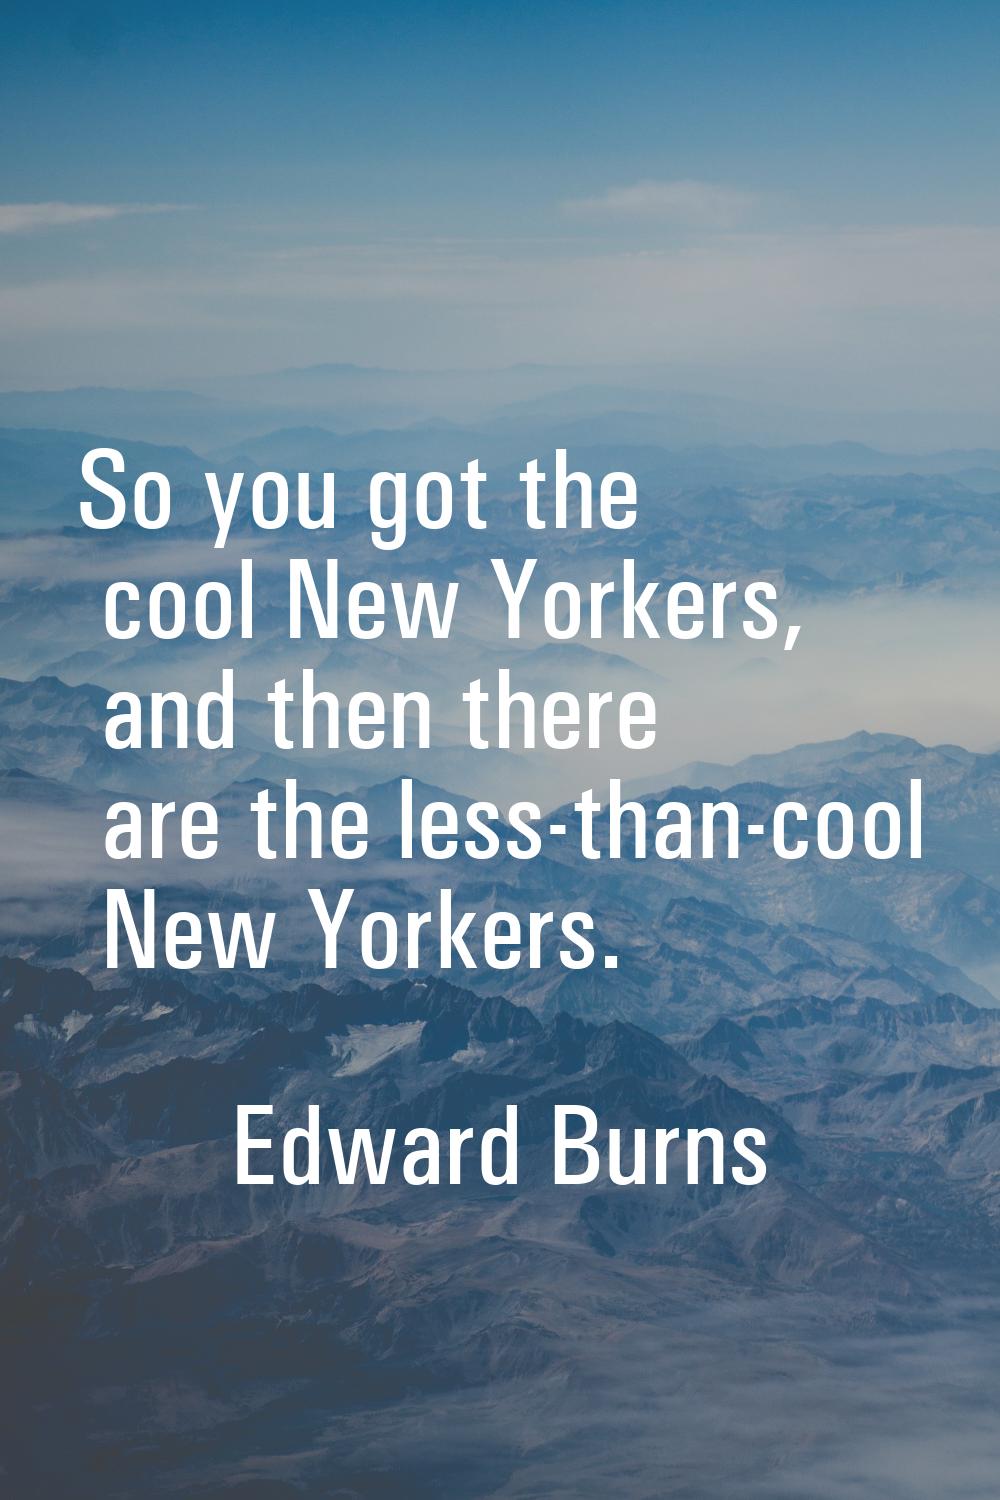 So you got the cool New Yorkers, and then there are the less-than-cool New Yorkers.